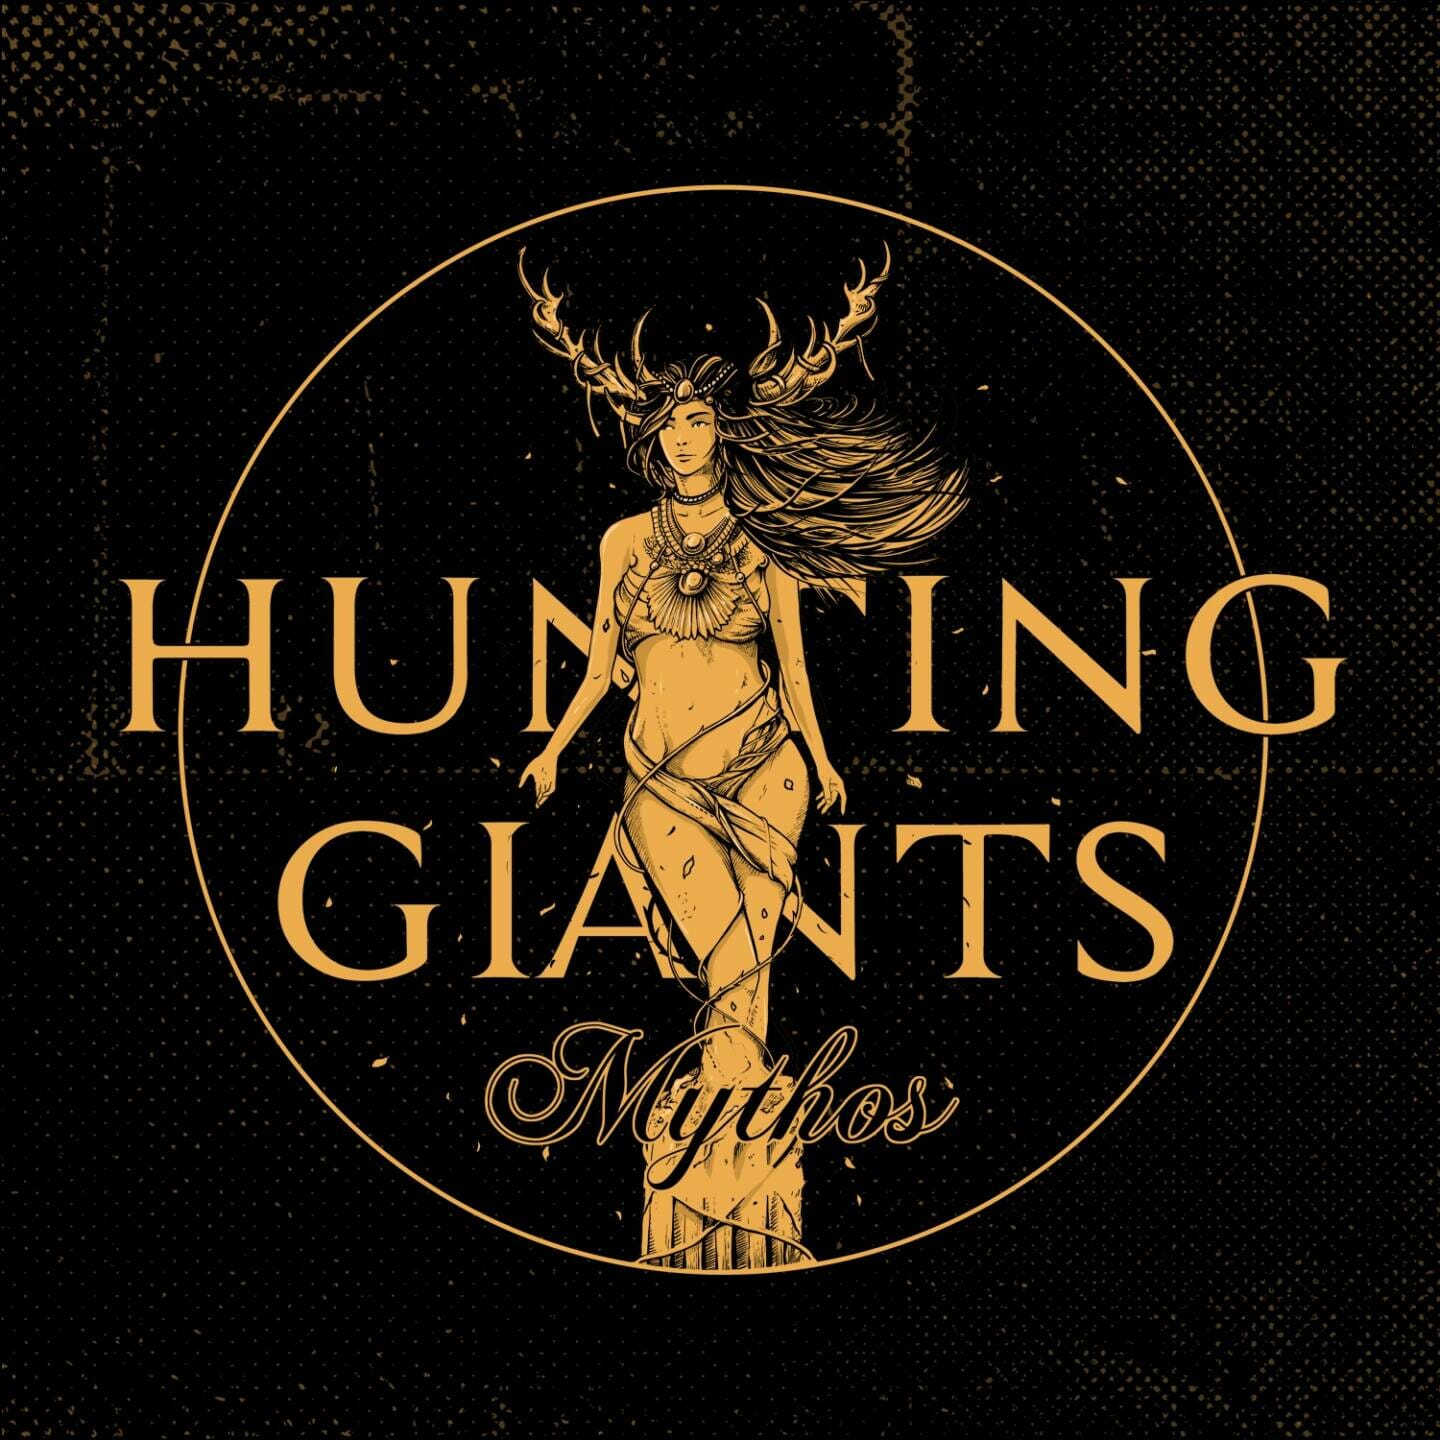 Hunting Giants premiere brand new video for King of Ashes